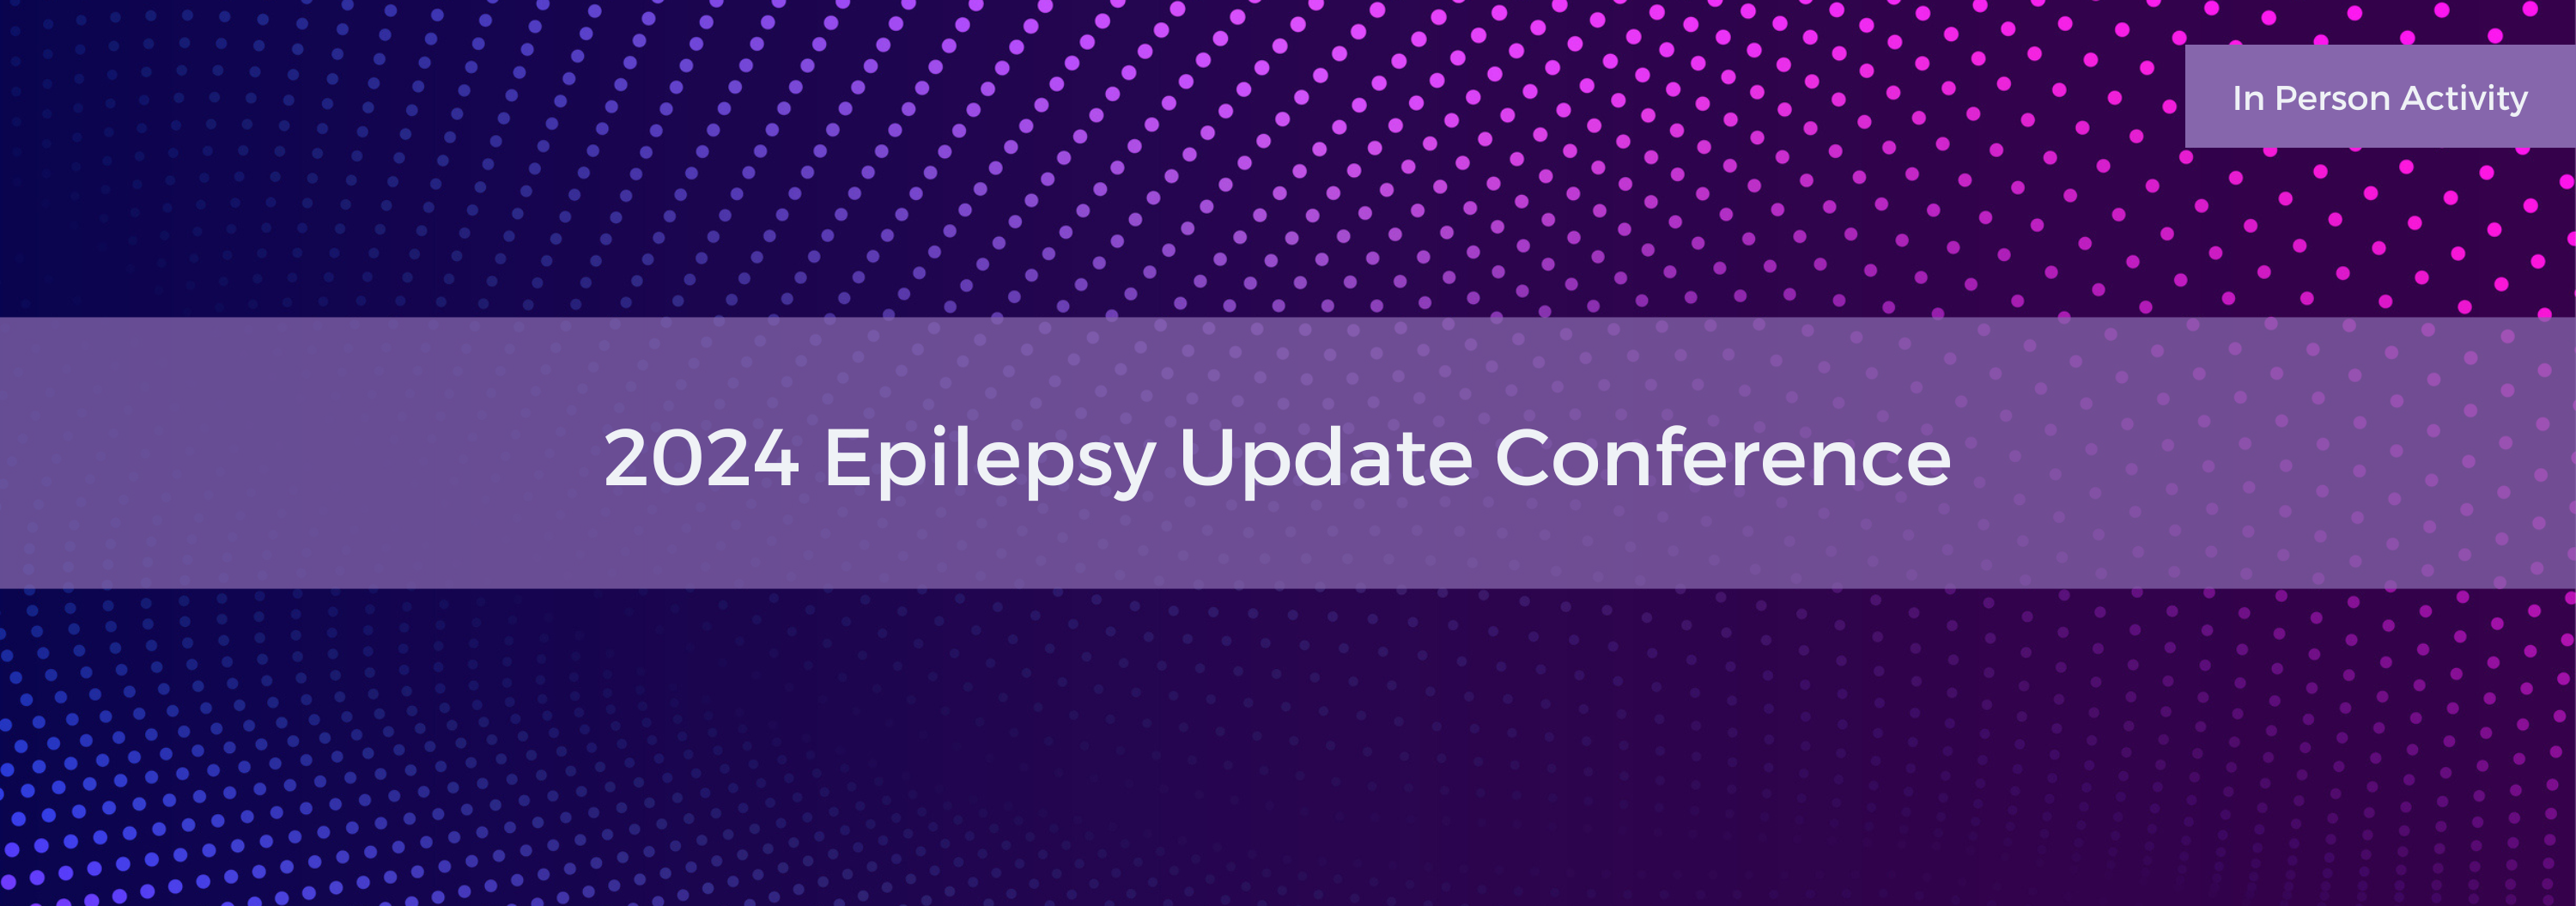 2024 Epilepsy Update Conference Banner